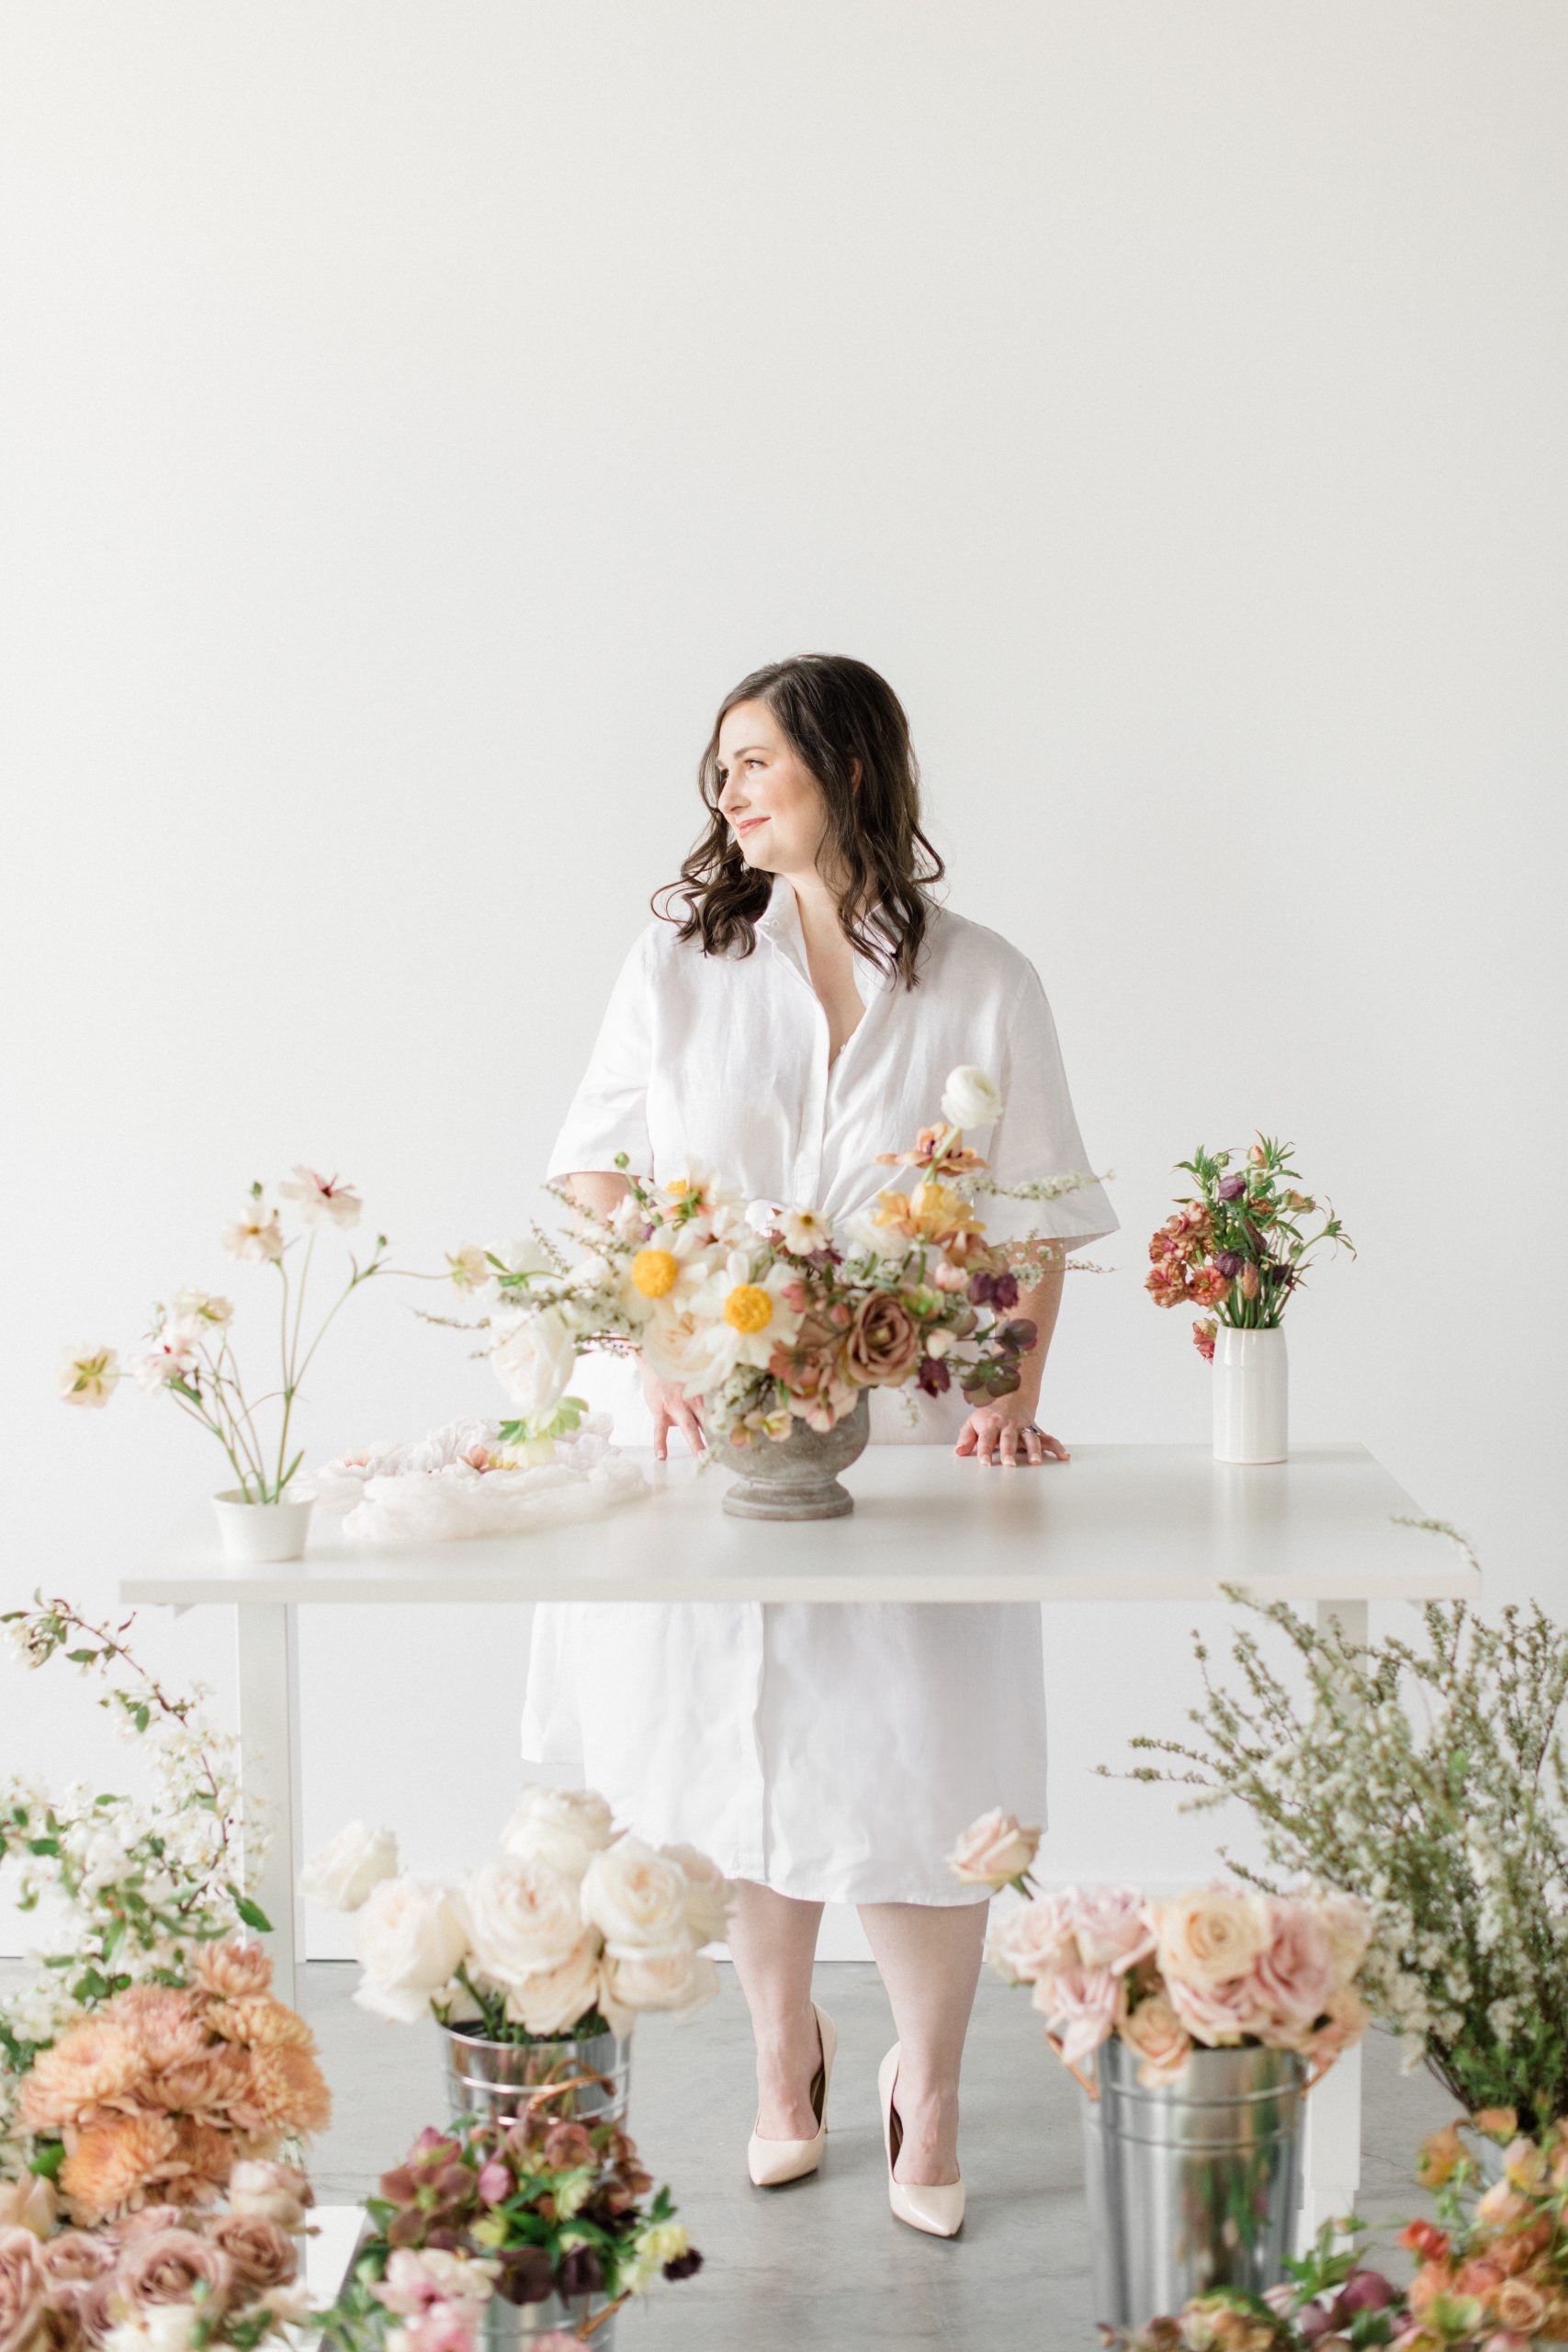 Owner Carolyn Kulb standing in a flower studio, surrounded by flowers